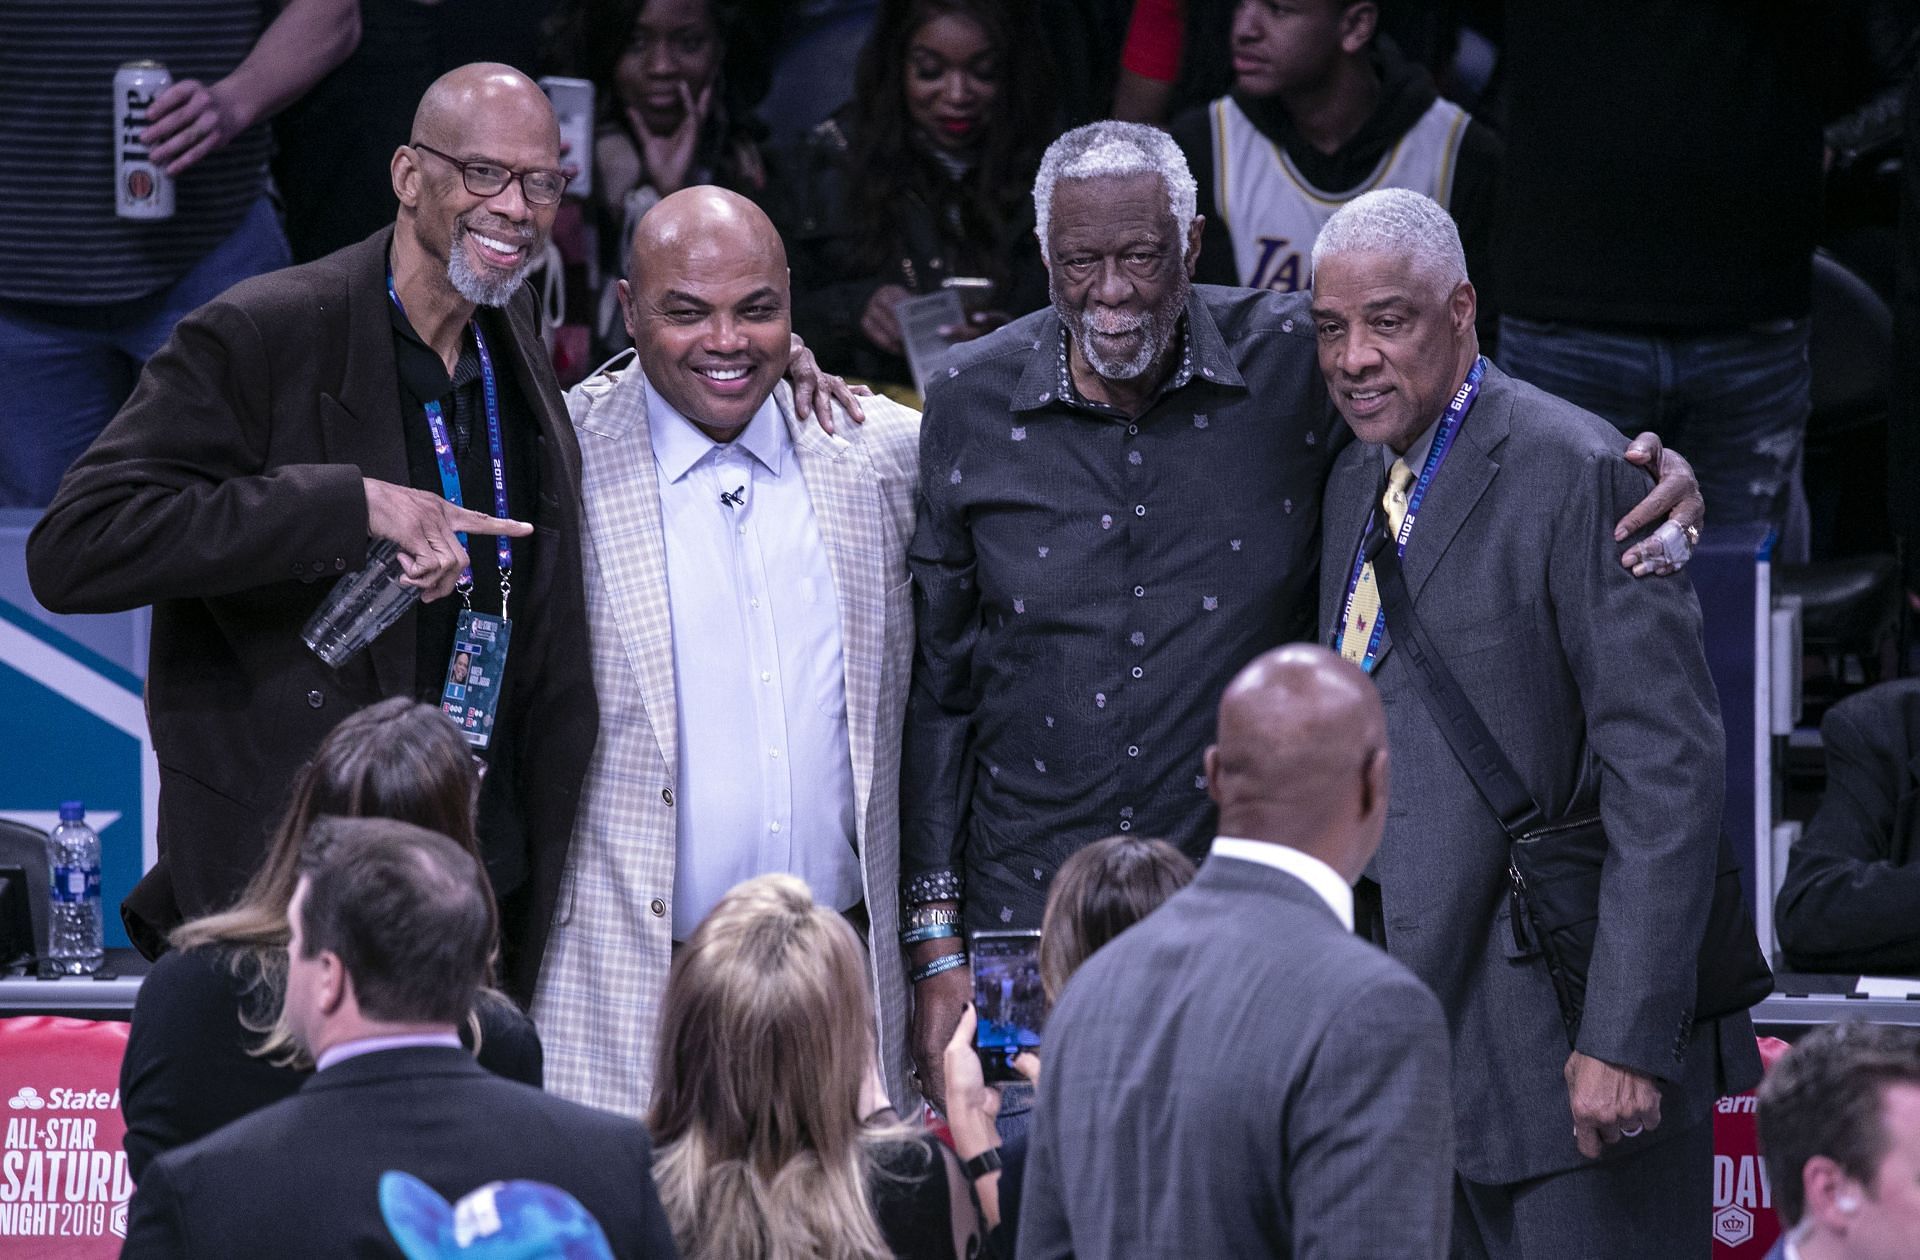 NBA Legend Bill Russell Auctions Championship Rings and Memorabilia